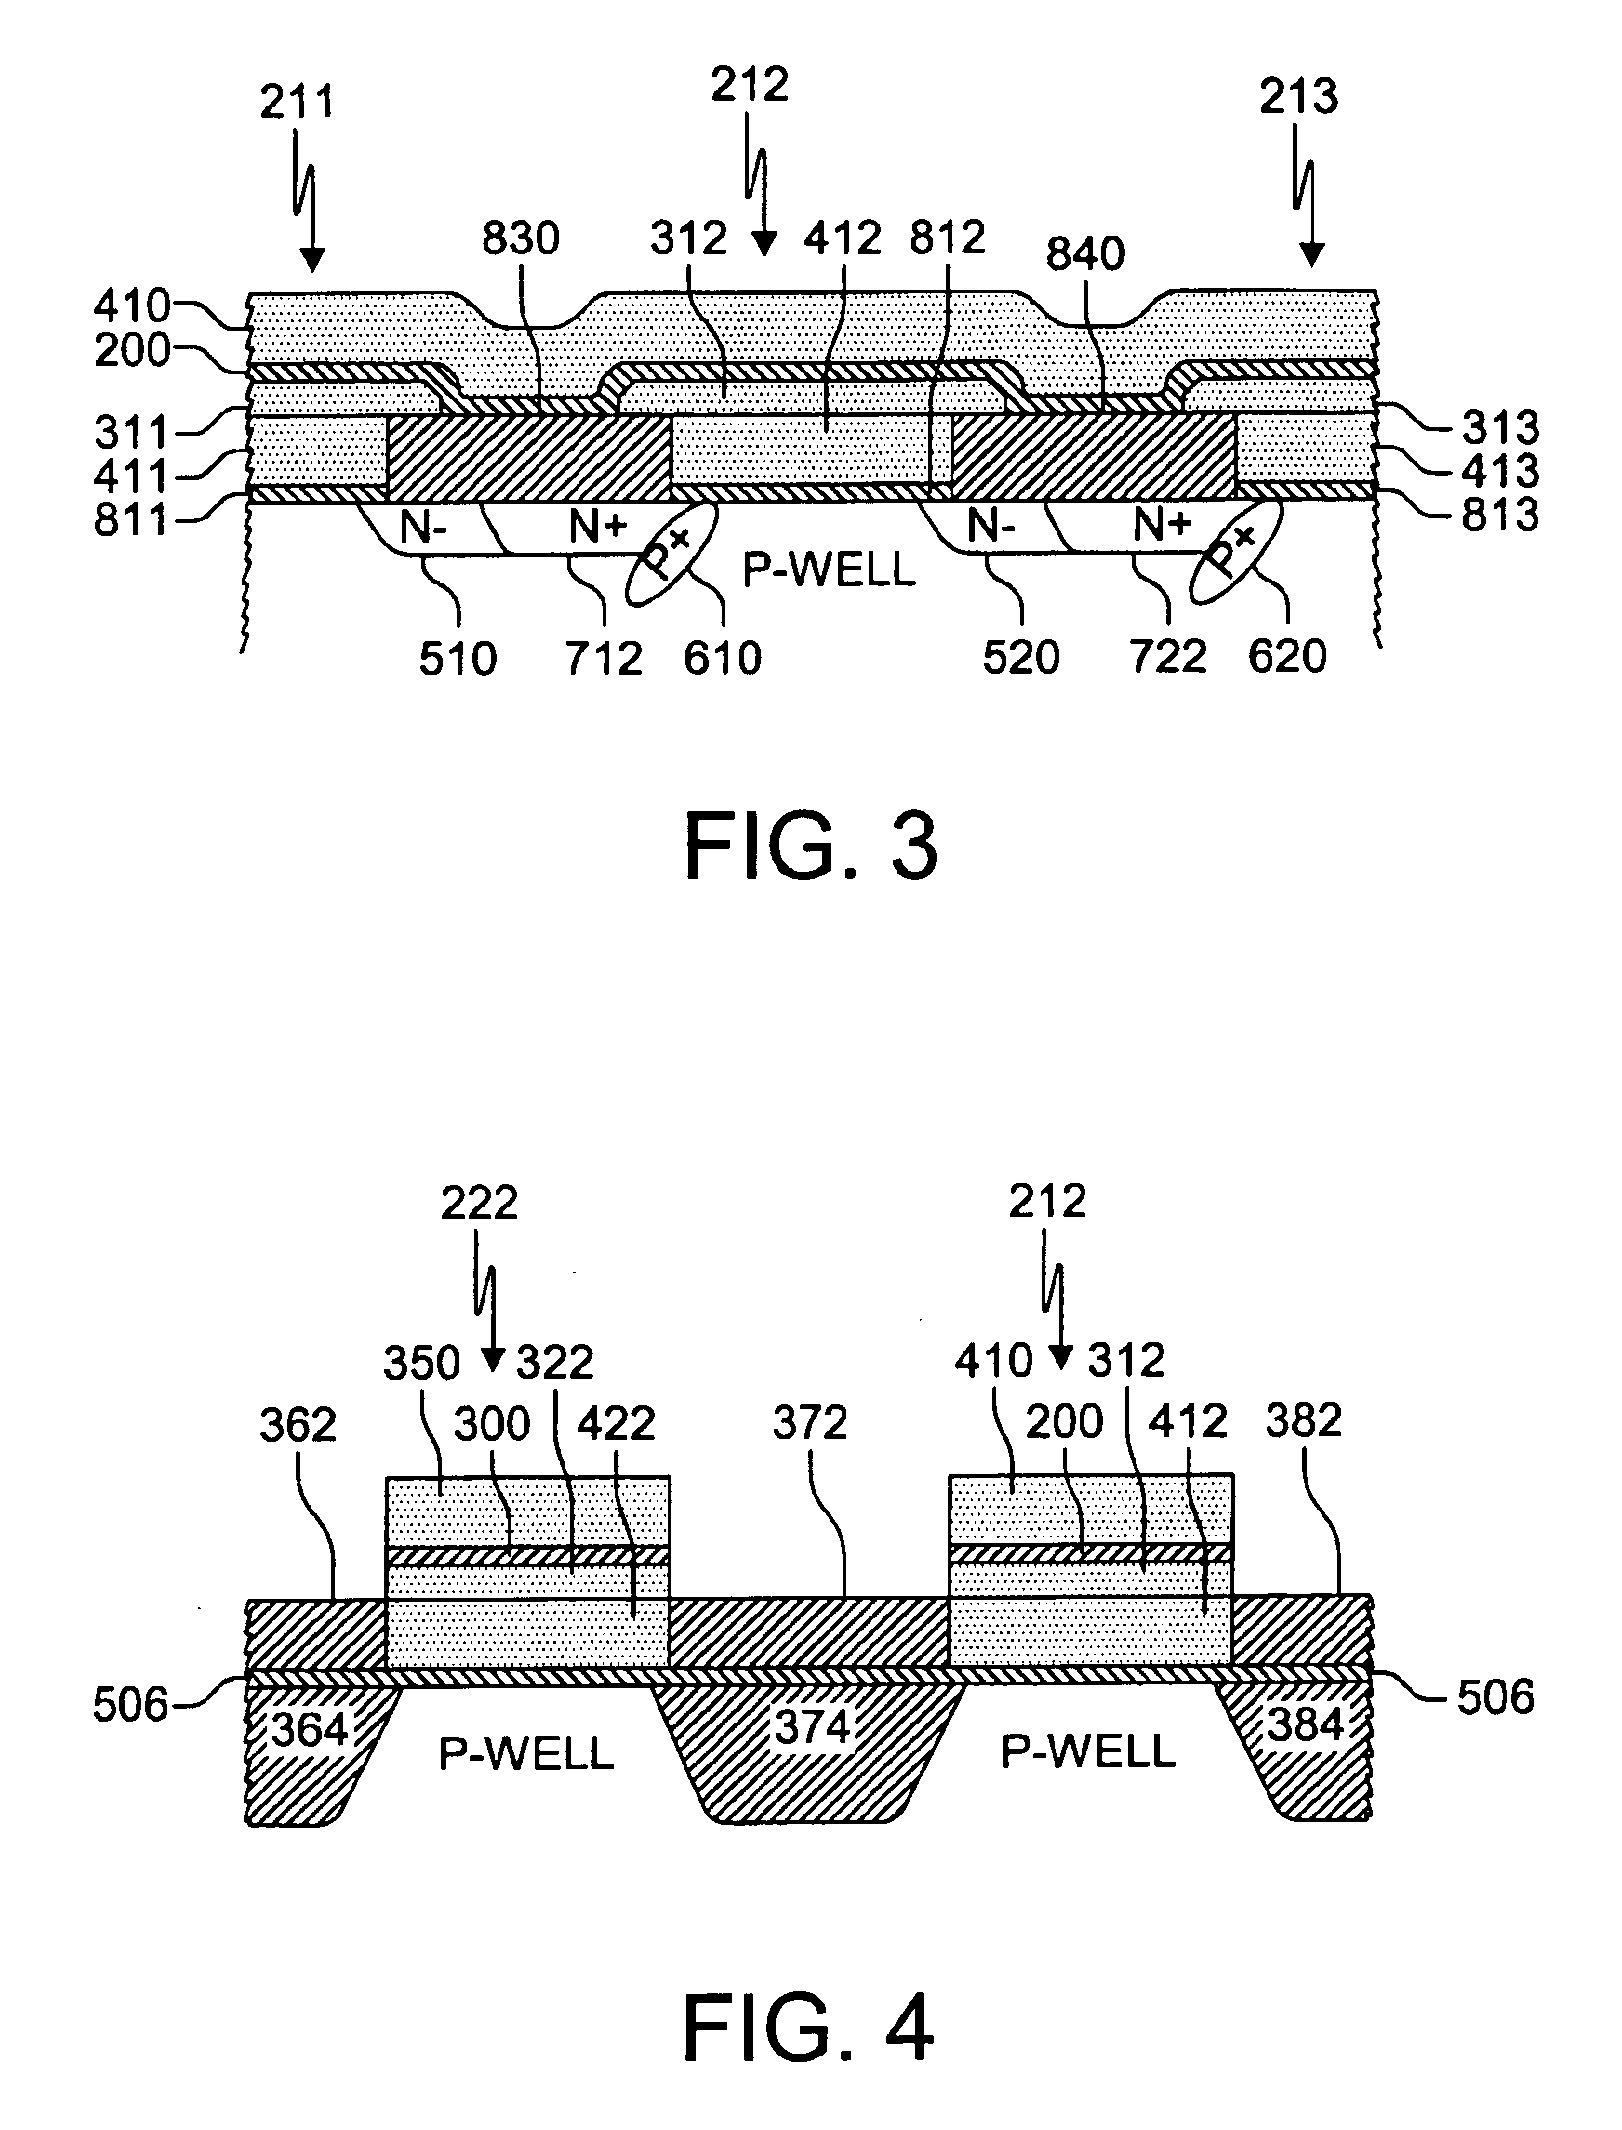 Virtual ground single transistor memory cell, memory array incorporating same, and method of operation thereof